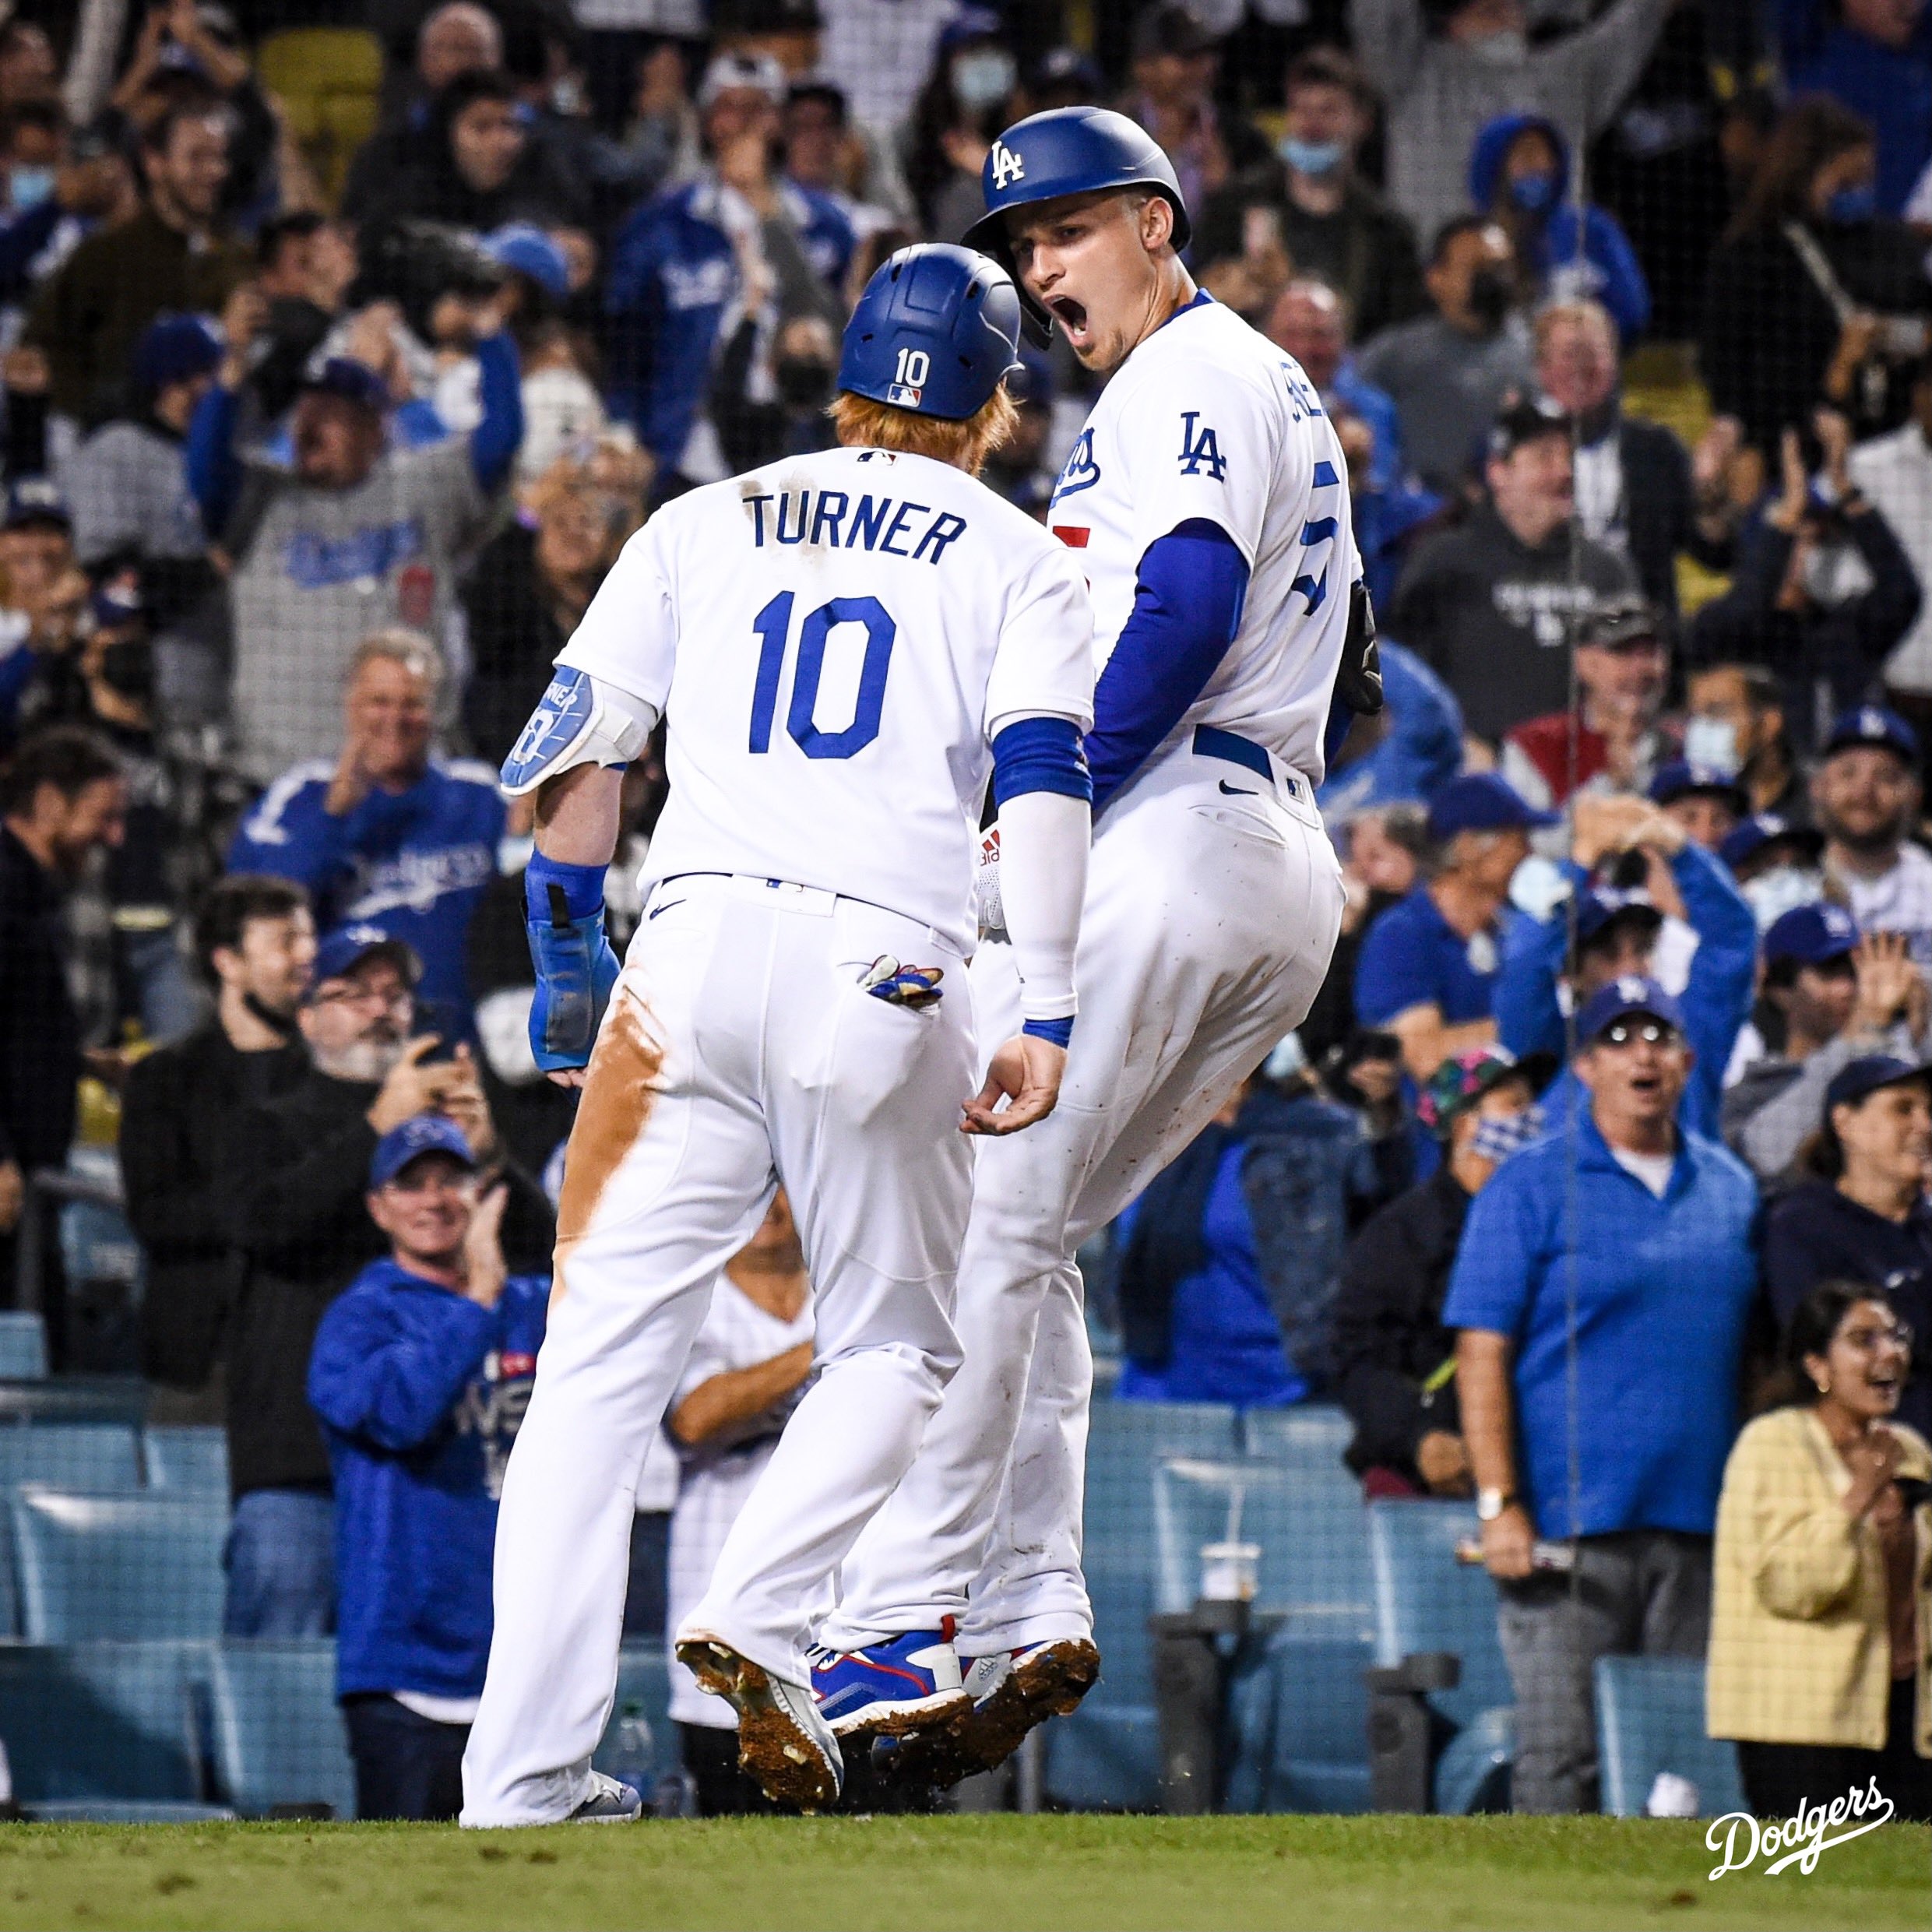 Core Seager 2-run home run gives Dodgers epic win